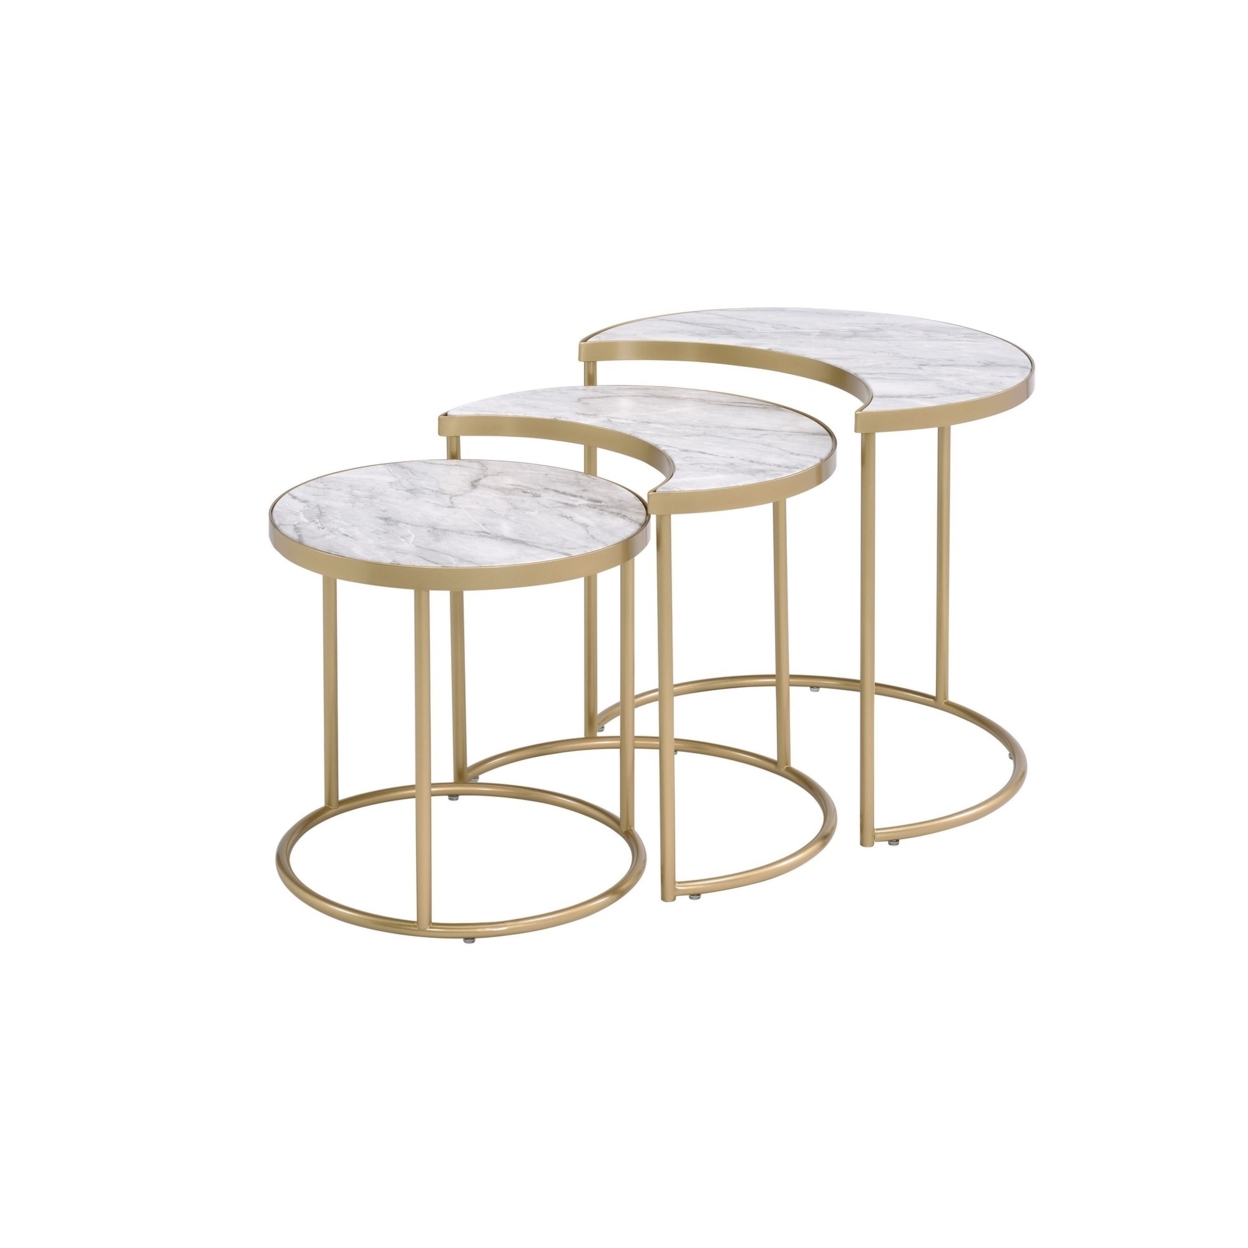 Metal Nesting Coffee Table With Faux Marble Top, Set Of 3, Gold And White- Saltoro Sherpi